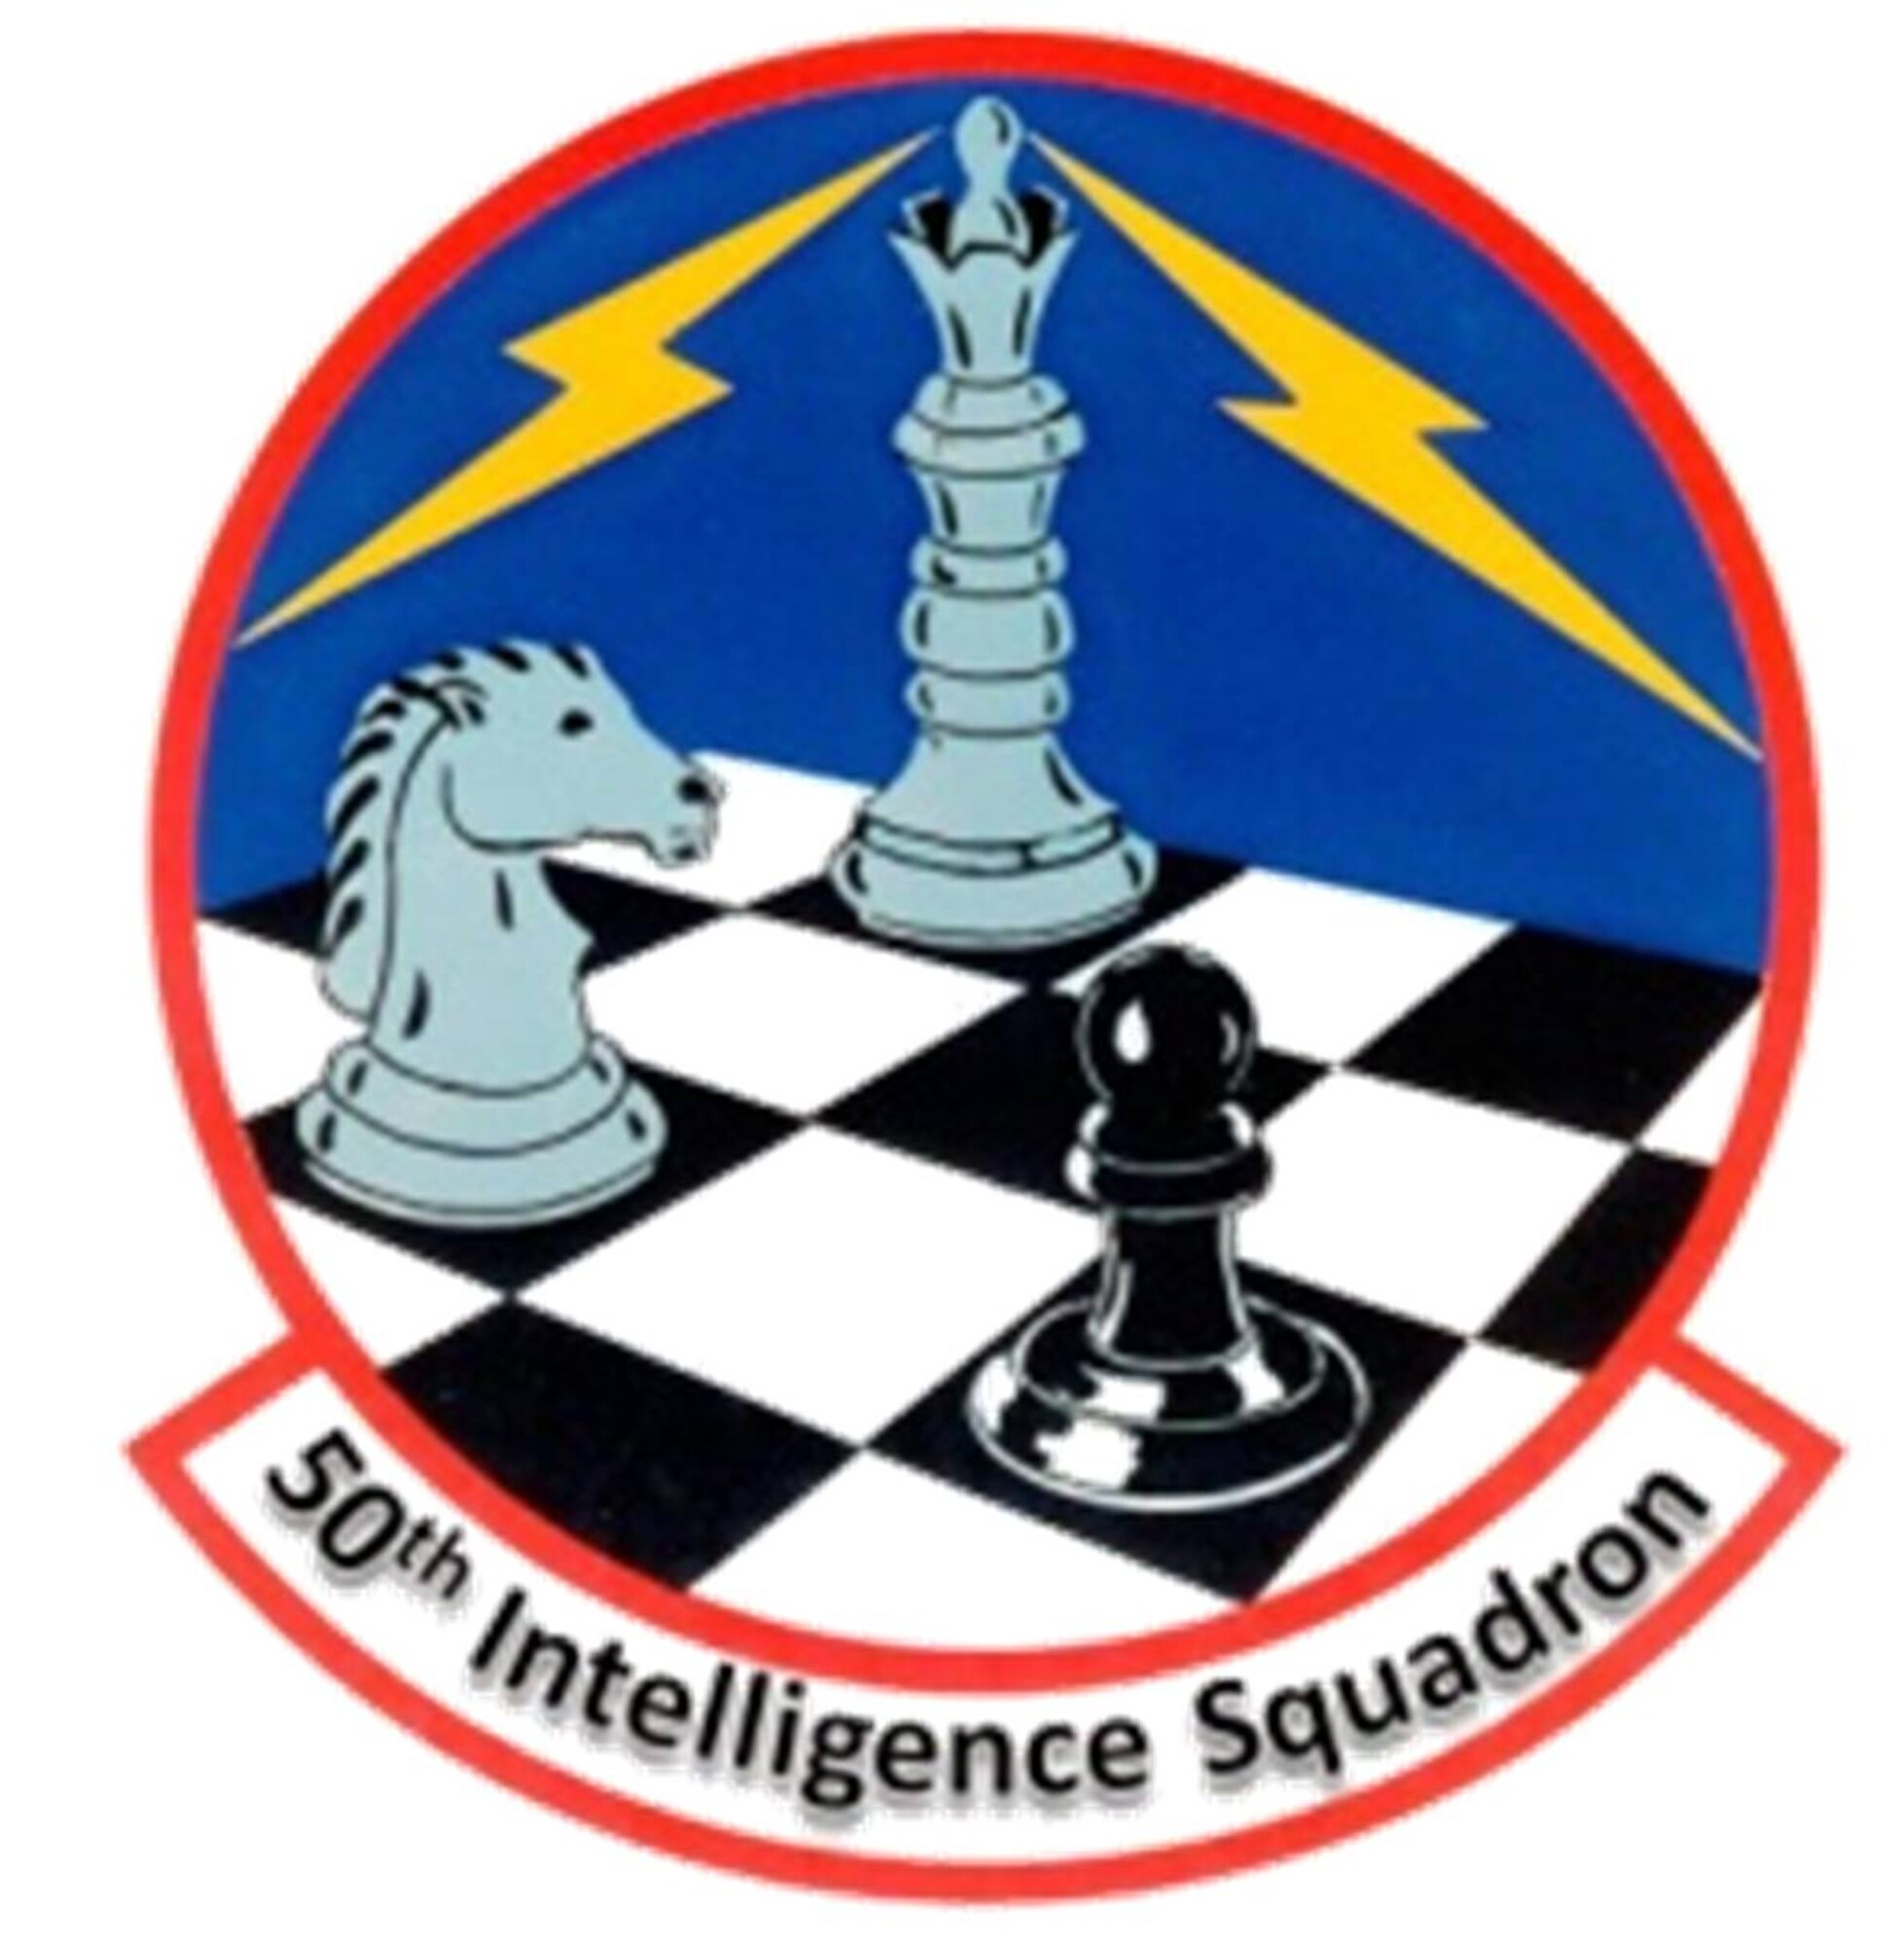 50th Intelligence Squadron Patch, 940th Wing, Beale AFB, Calif.